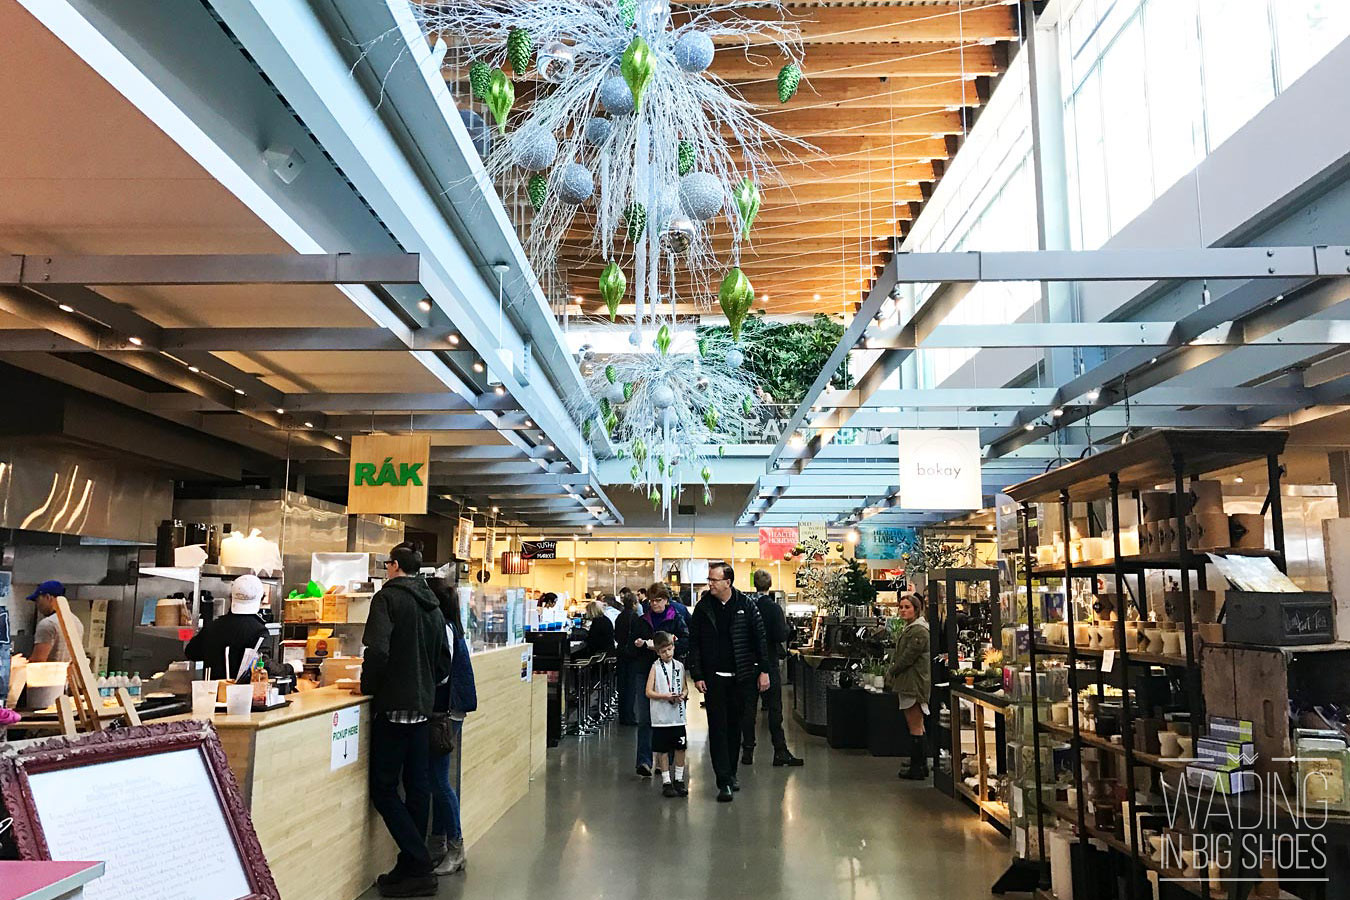 Food Lover’s Dream: Explore Grand Rapids' Downtown Market - Wading in Big Shoes